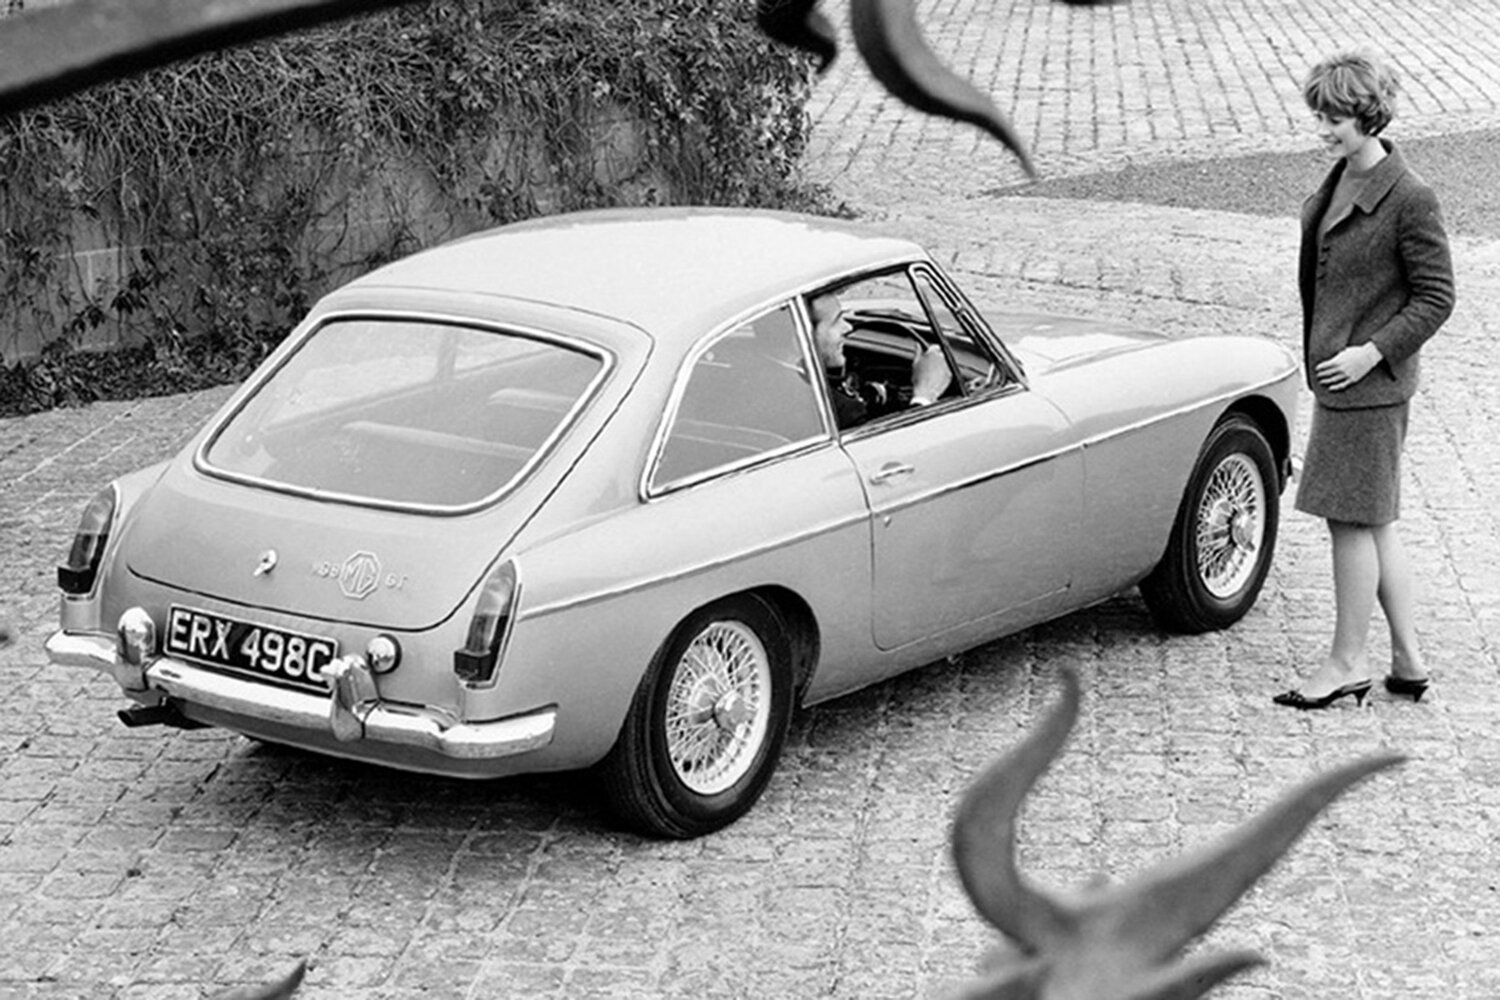 Mgb And Mgb Review And Buying Guide | CCFS UK